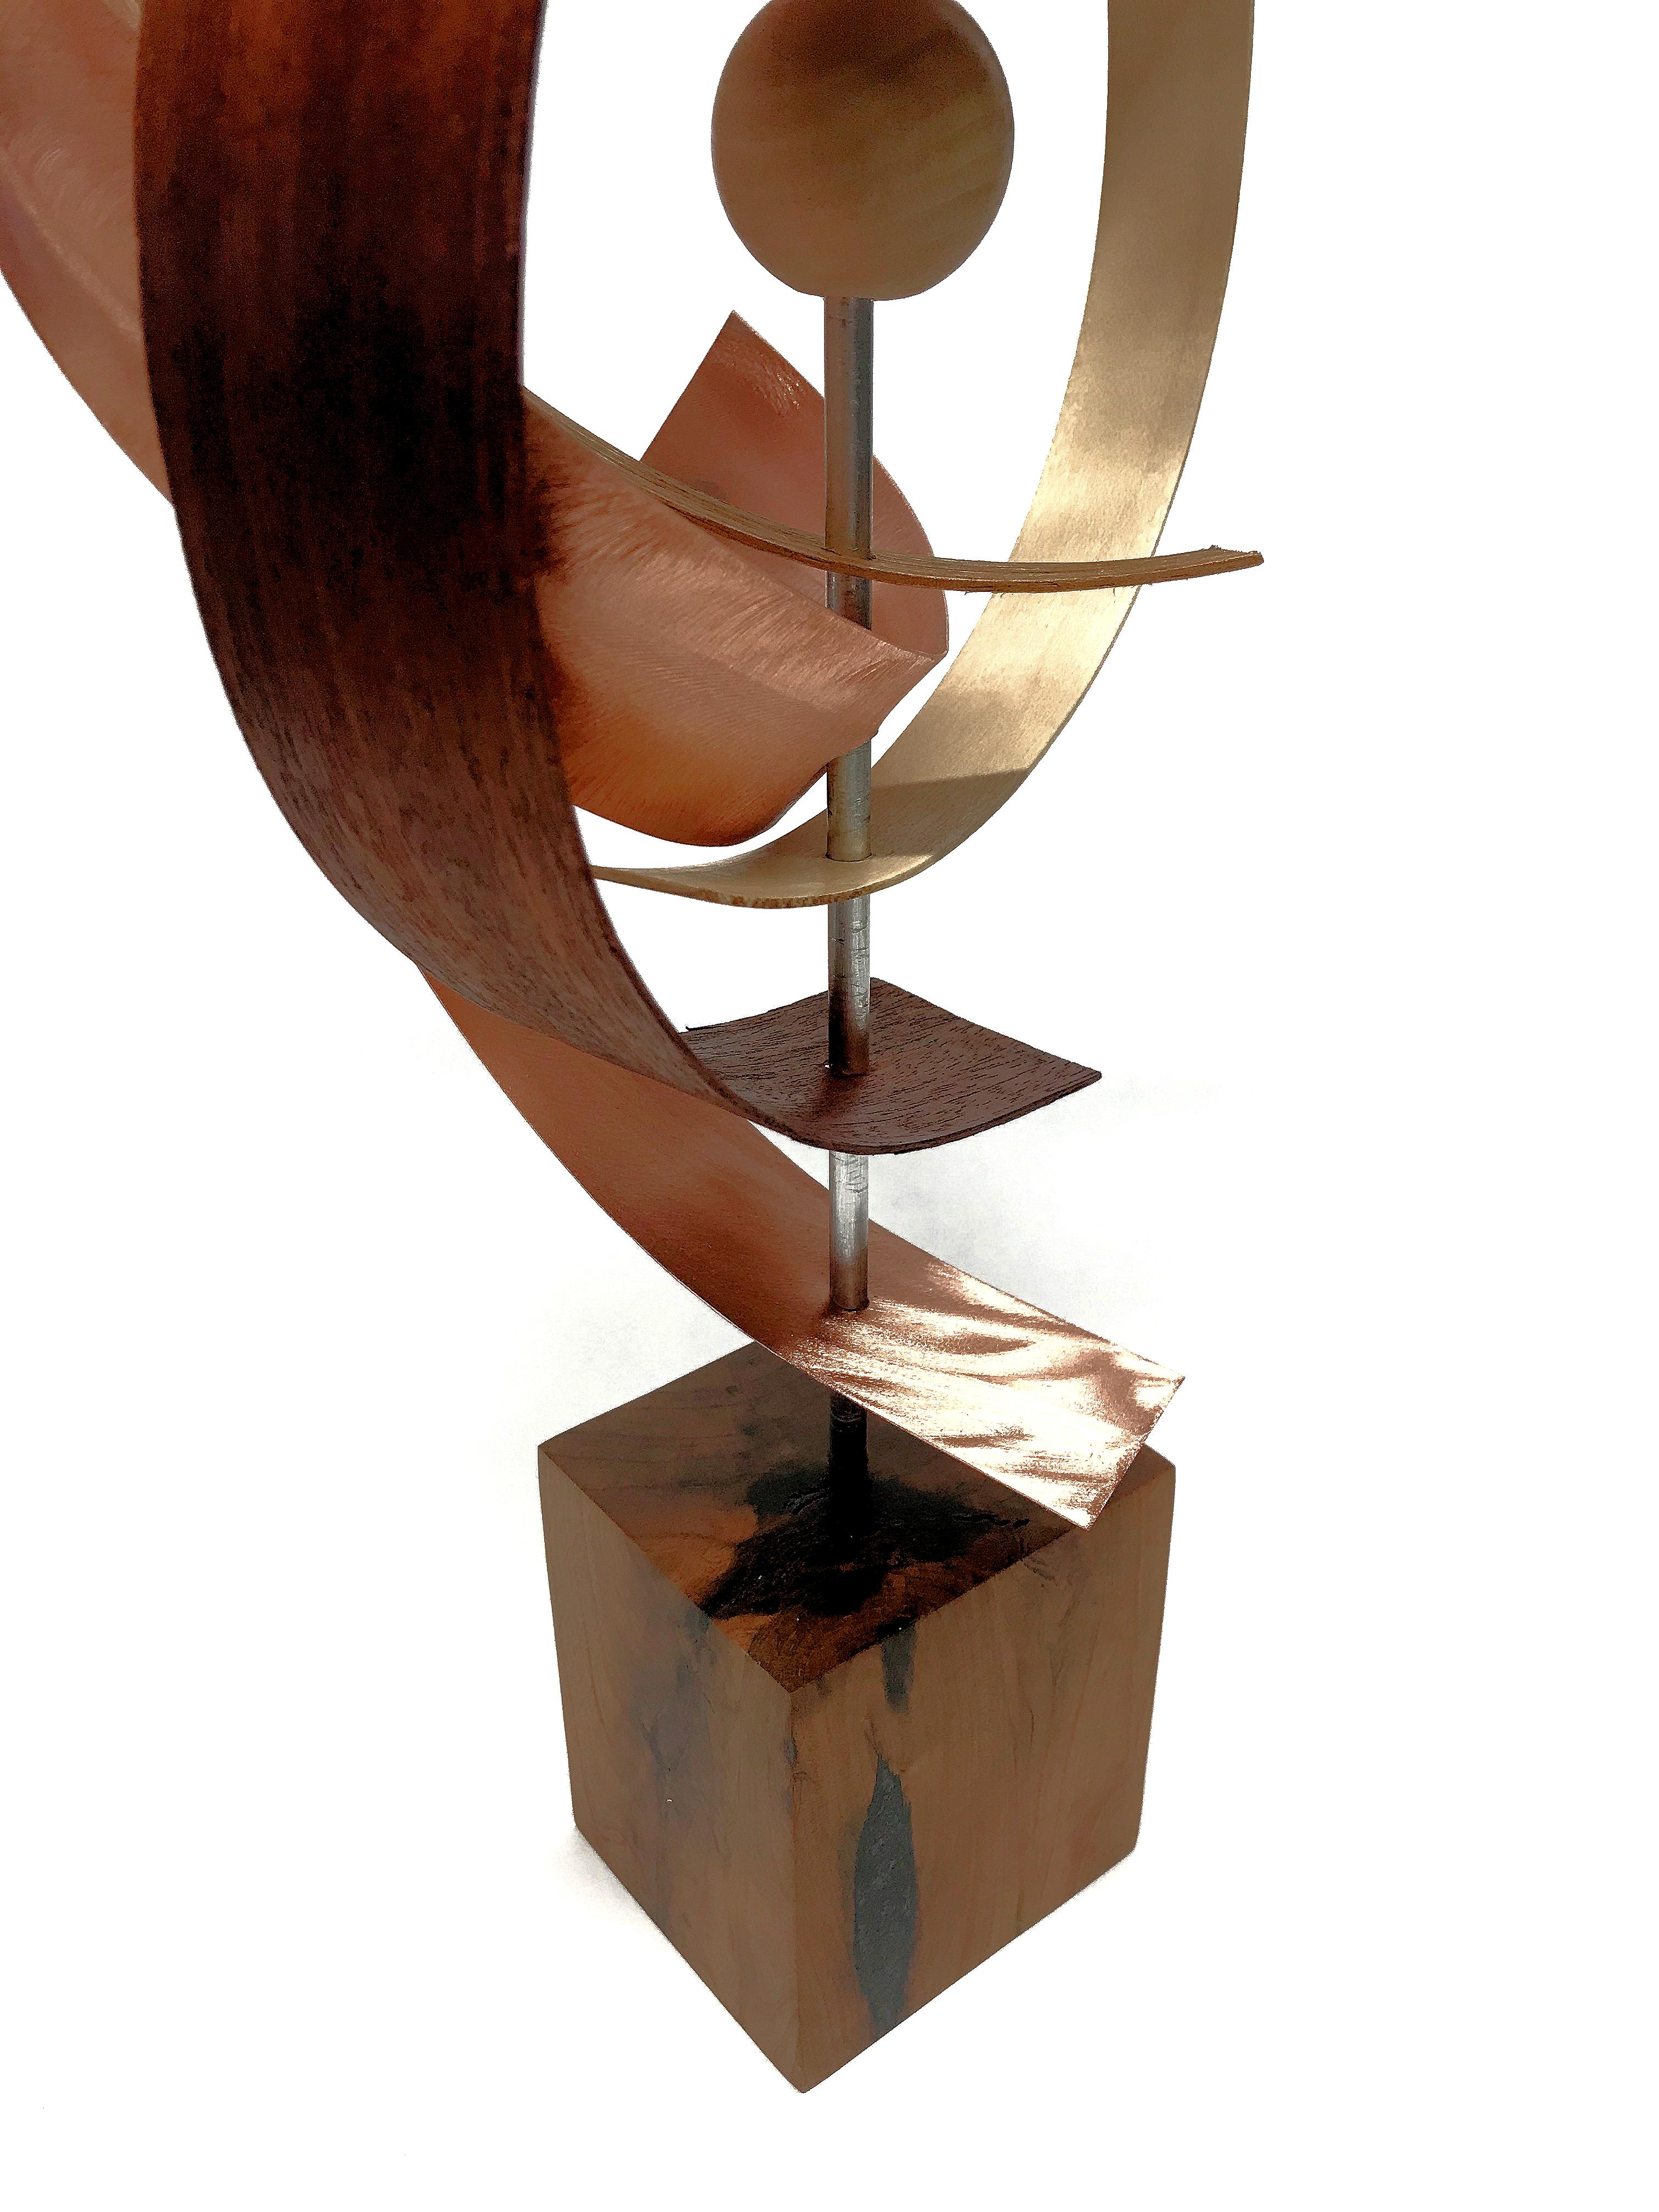 This Mid-Century Modern Inspired Wood Sculpture is comprised of hickory black walnut mahogany with hand-ground copper and a wooden sphere accent. The base is solid cherry complimented with pewter epoxy inlay. 
Title: Waltz
Artist: Jeff